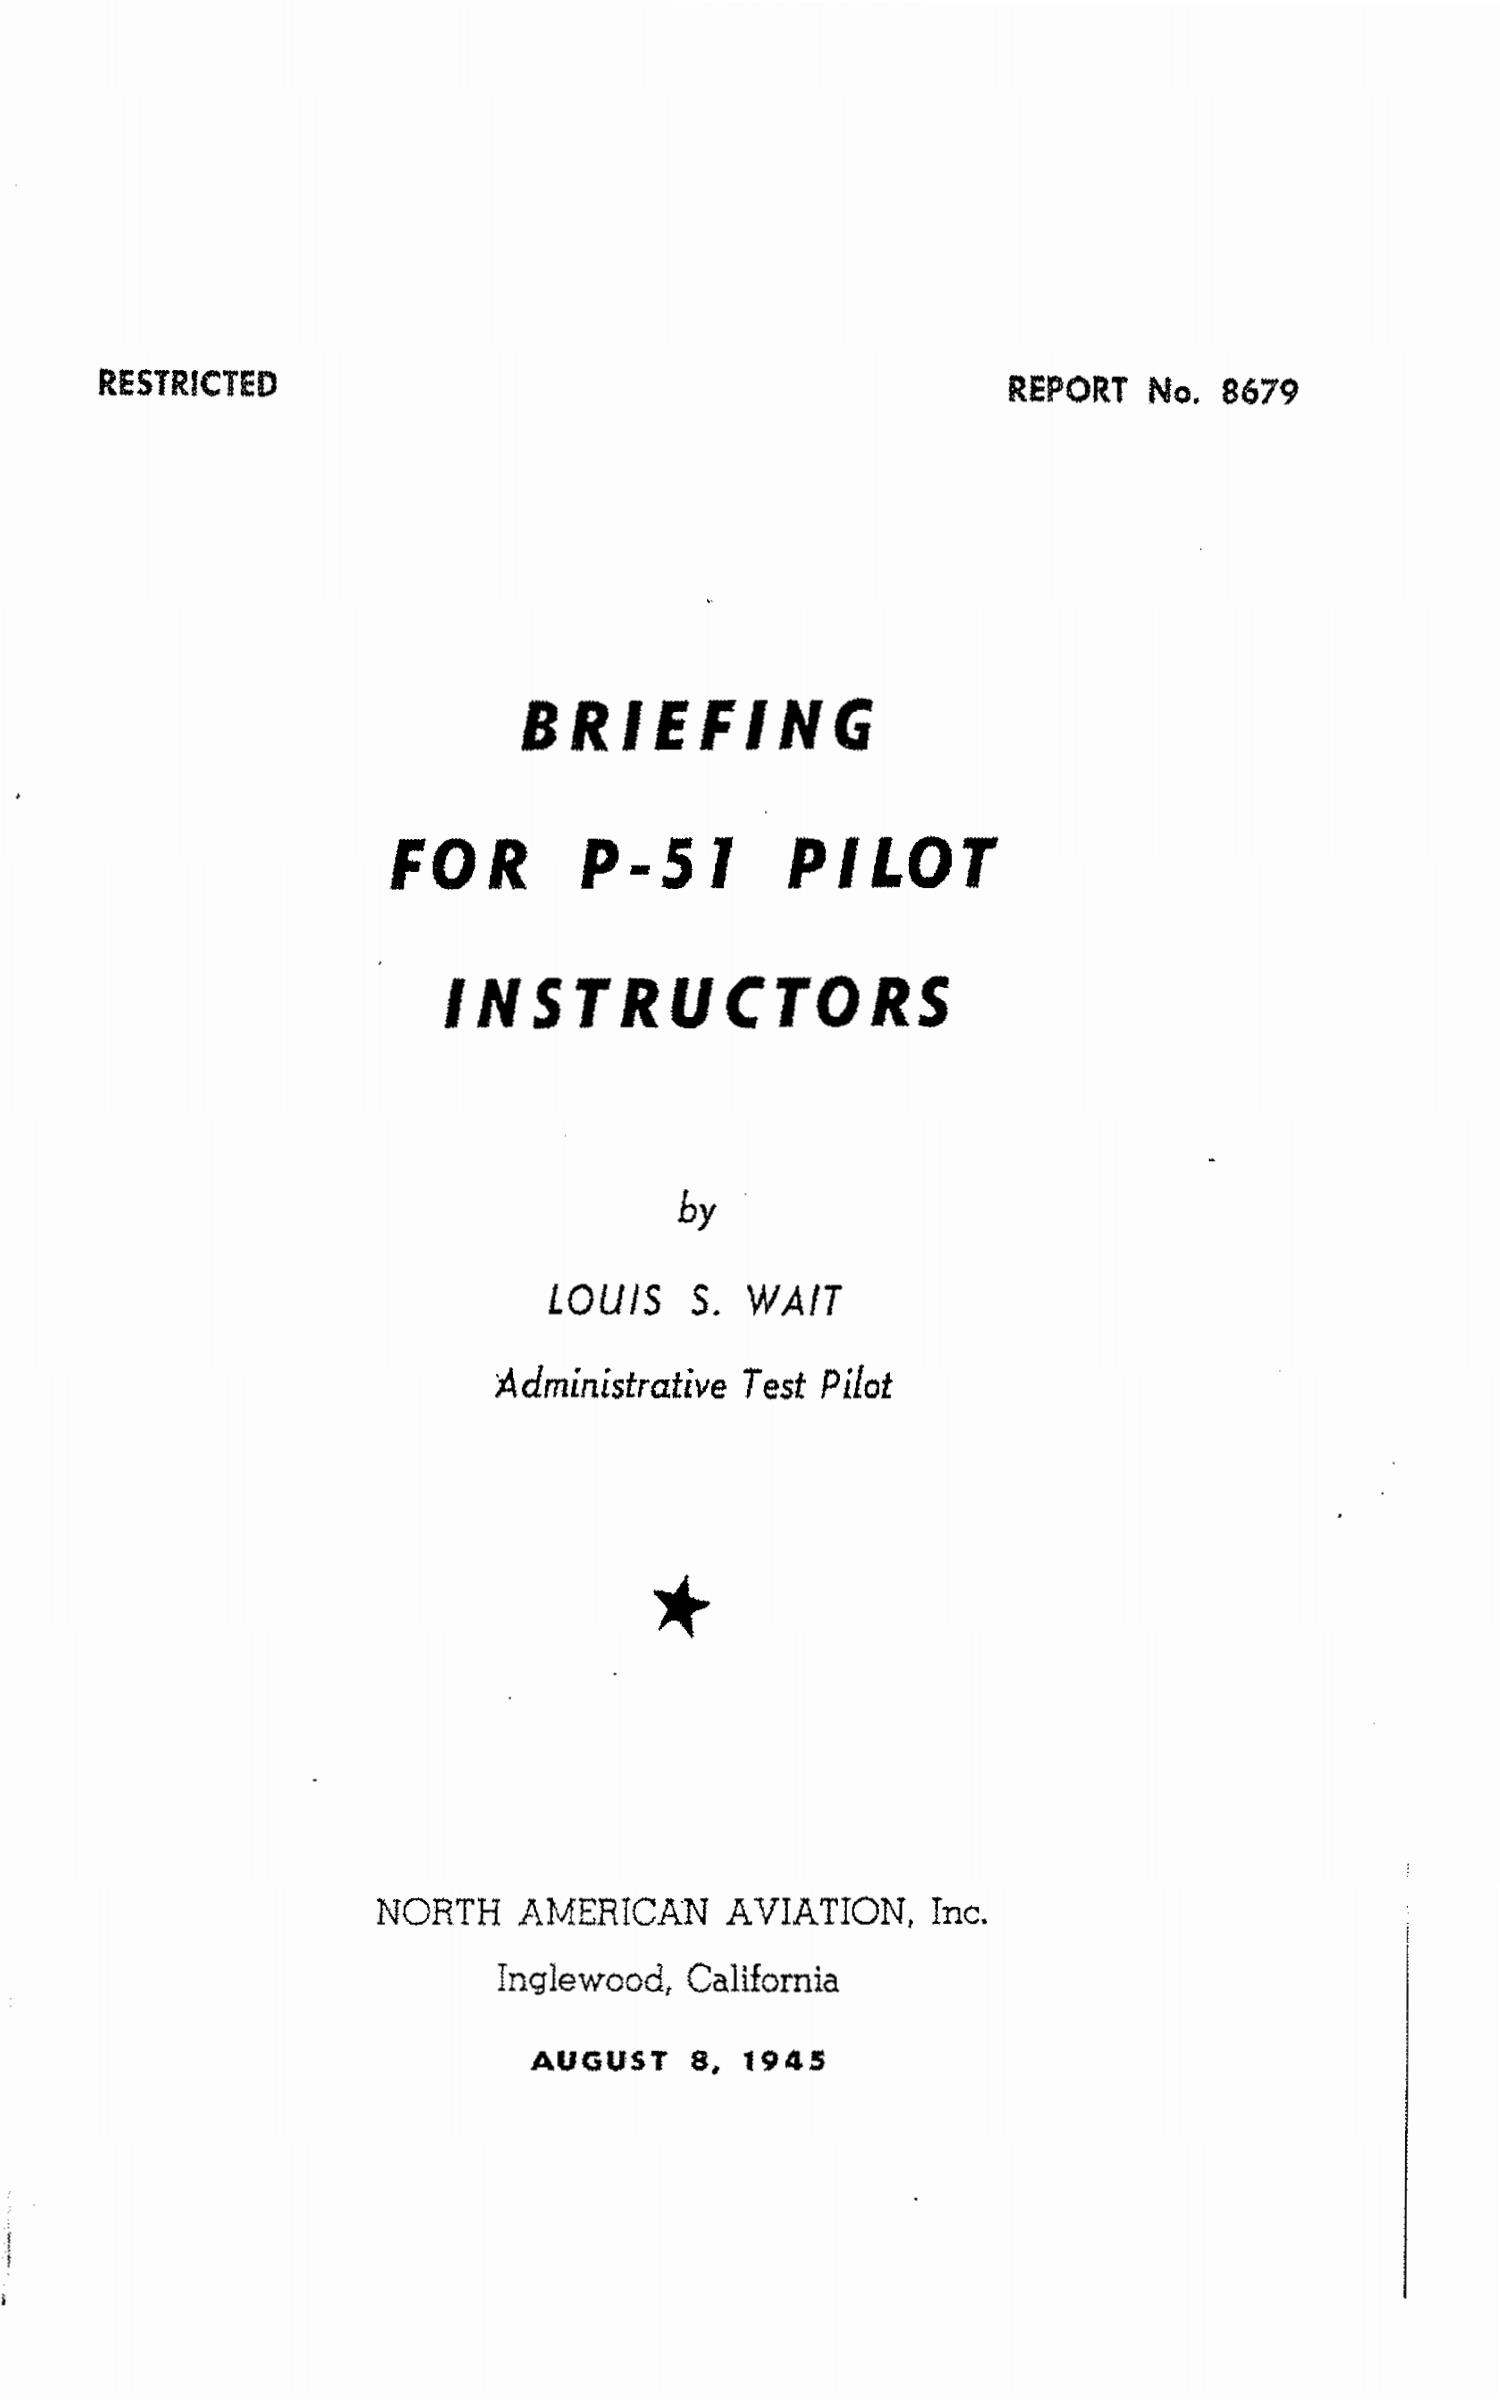 Sample page 1 from AirCorps Library document: Briefing for P-51 Pilot Instructors